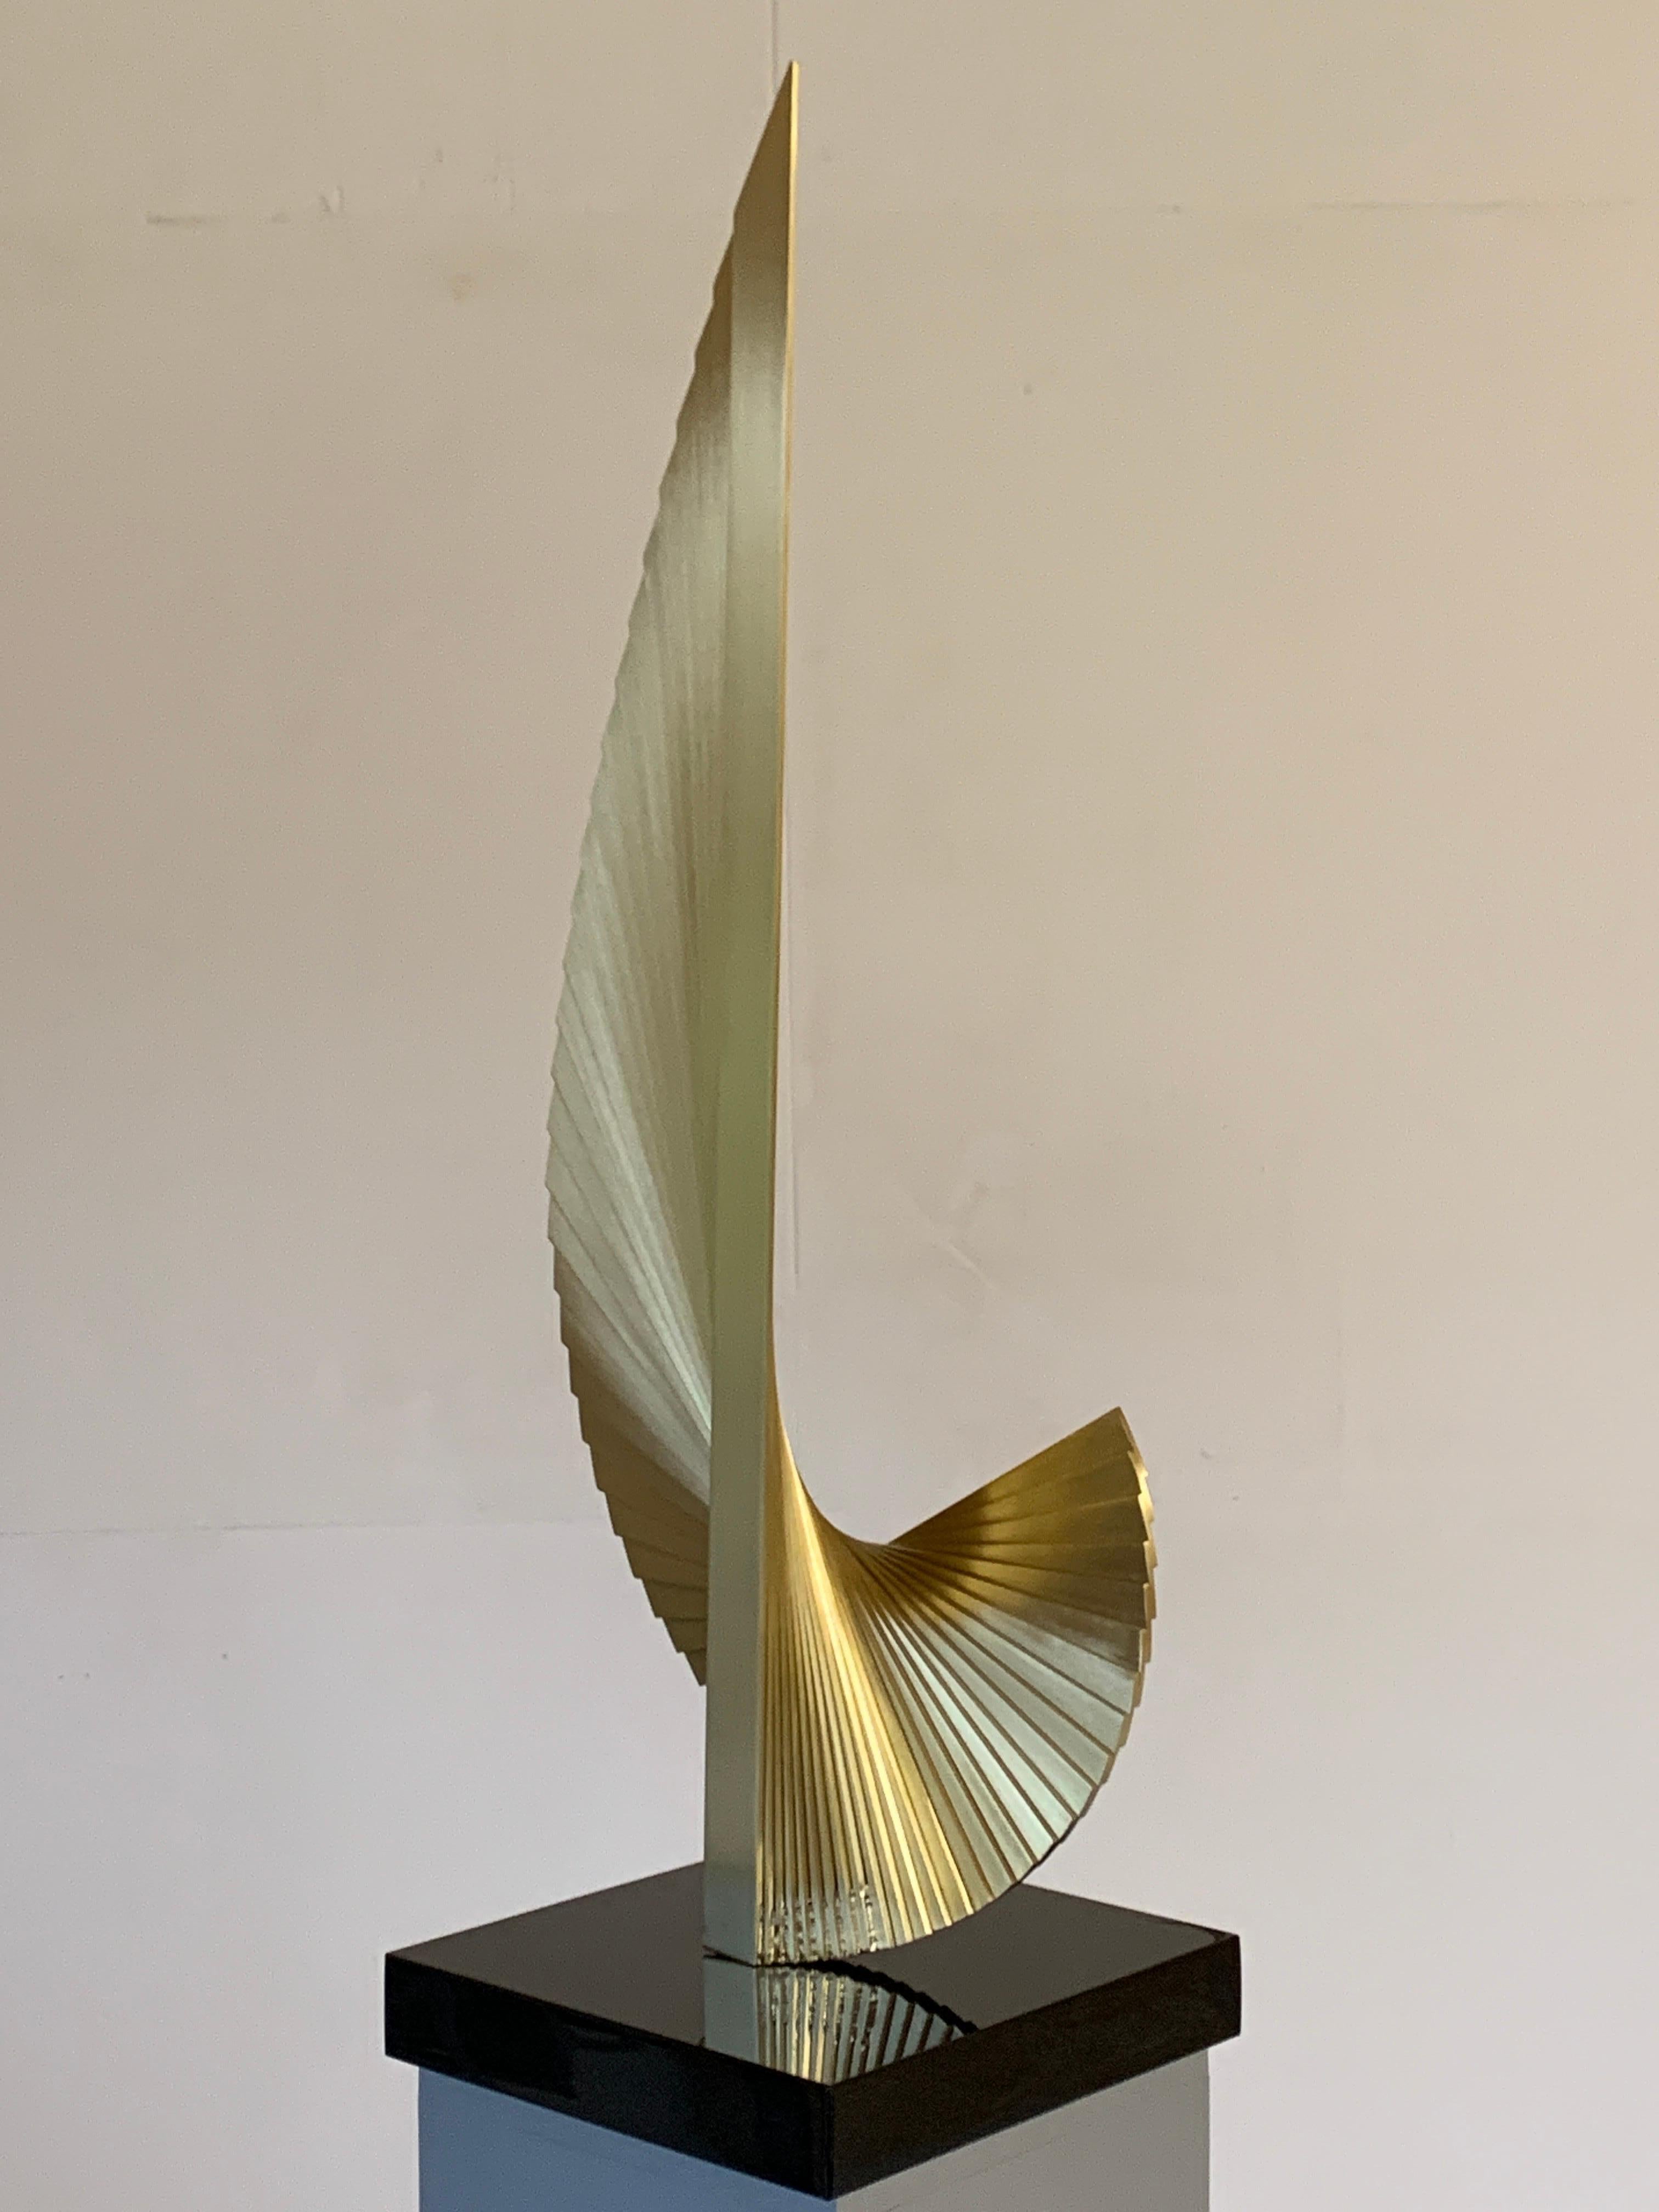 'Aurora' by British sculptor Thomas Joynes is based on the Golden Ratio, with perfectly proportioned flowing curves. The original concept was developed as part of a commission for The Crown Estate in London, where it was displayed in a foyer with a